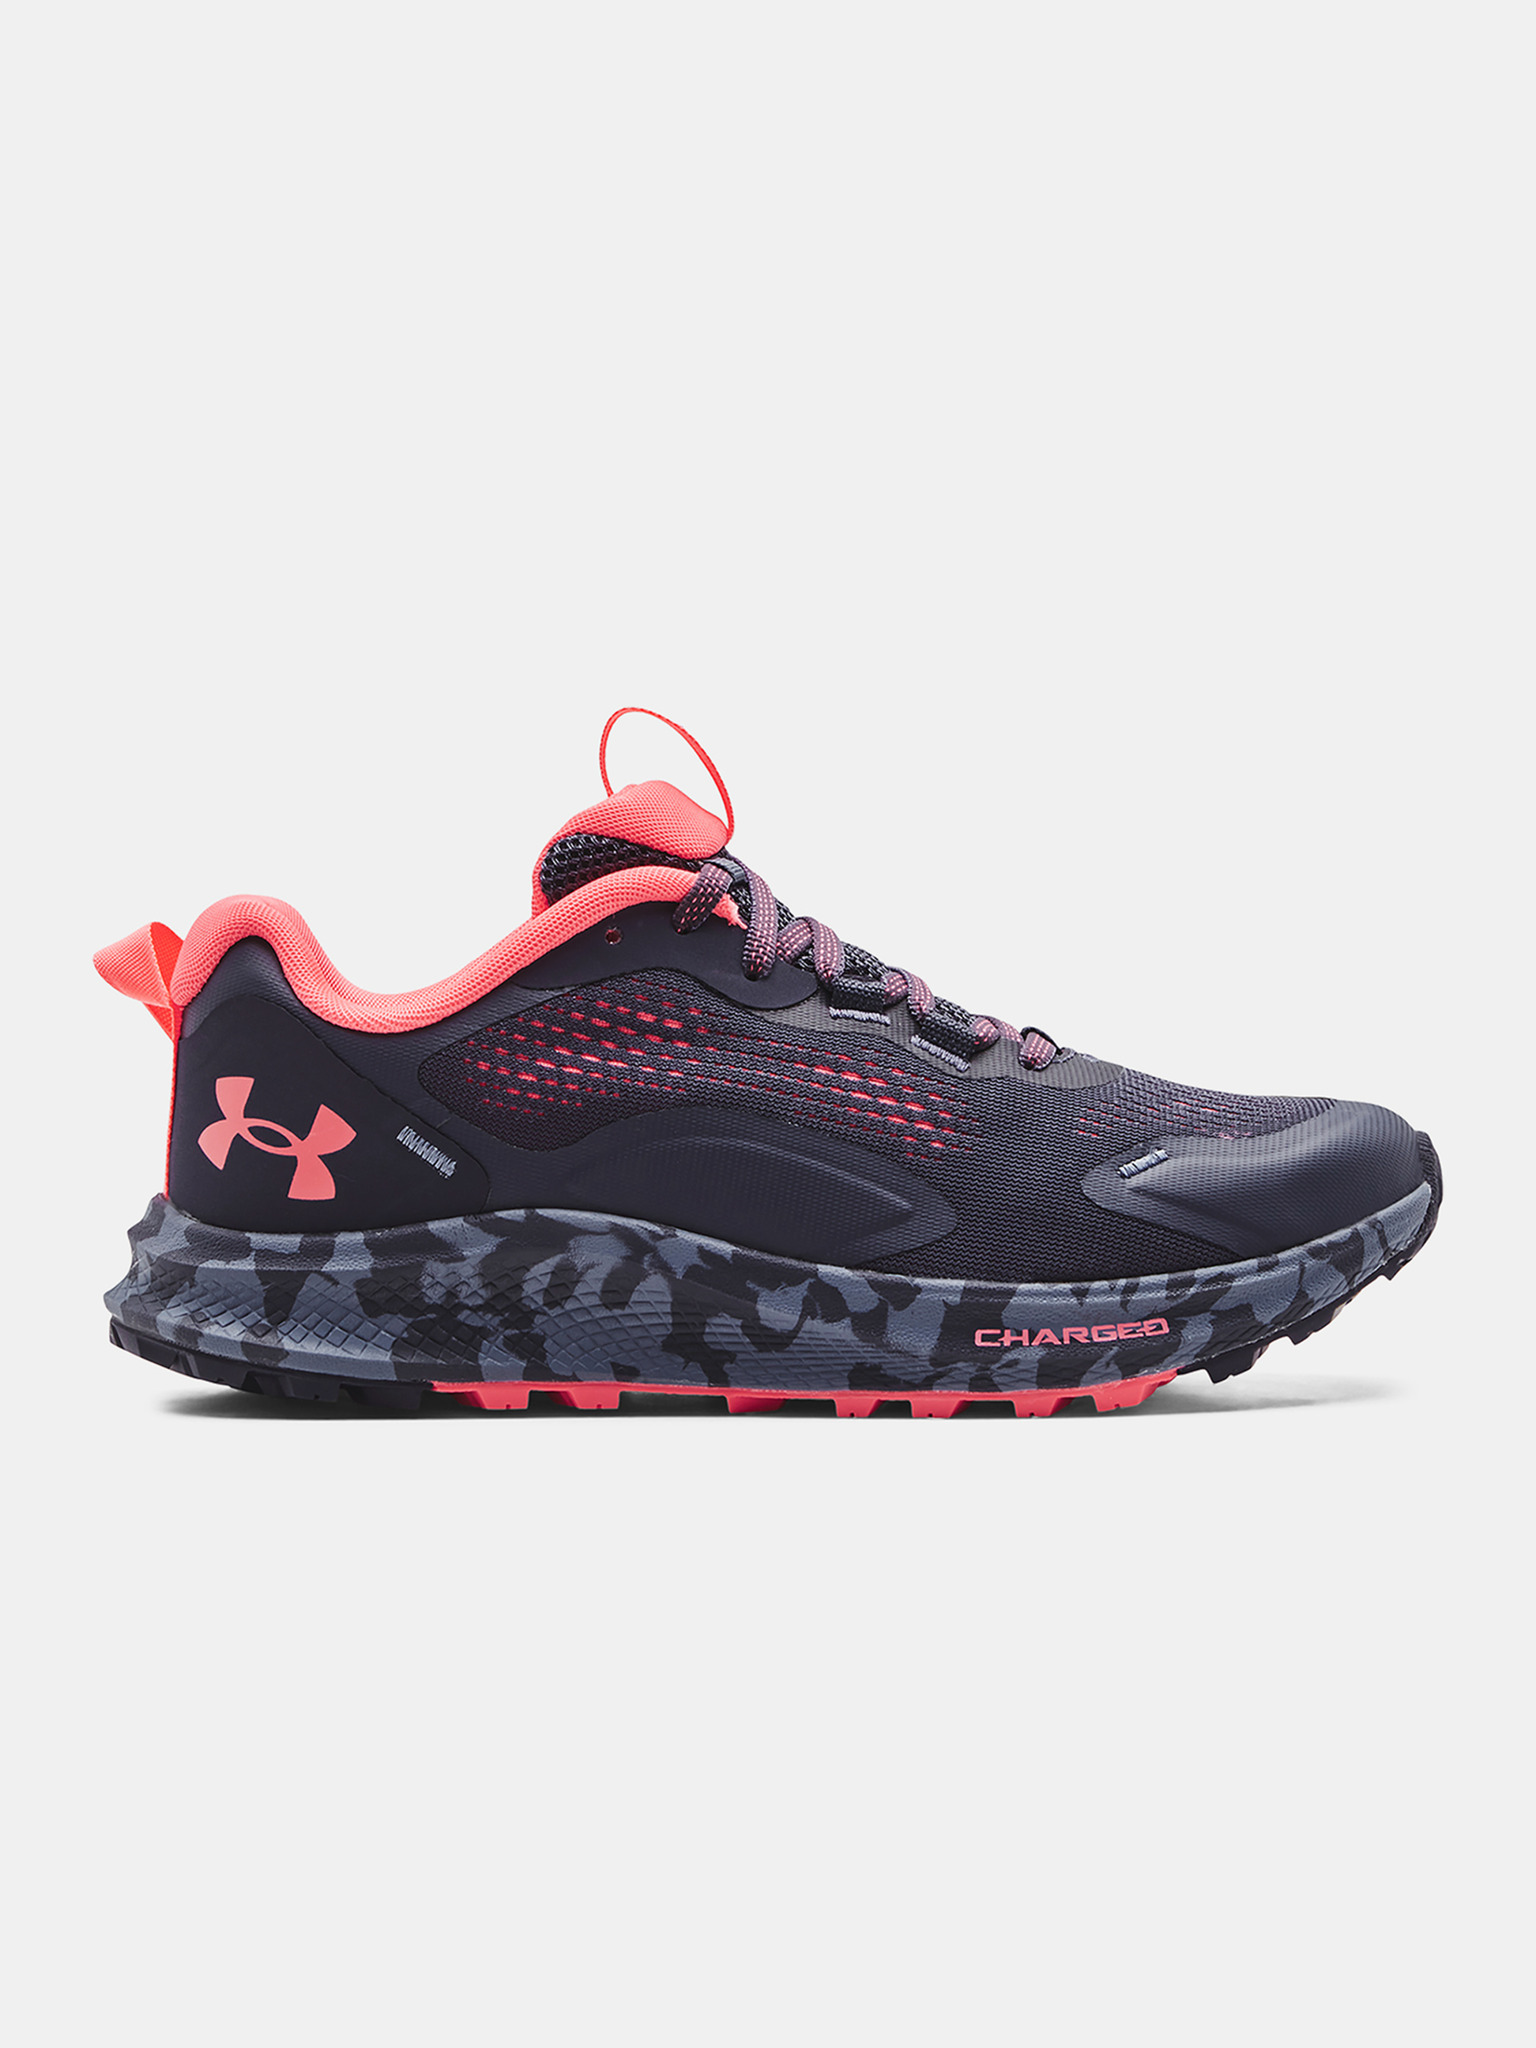 Under Armour Women's UA Charged Bandit TR 2 Running Shoes – Rumors